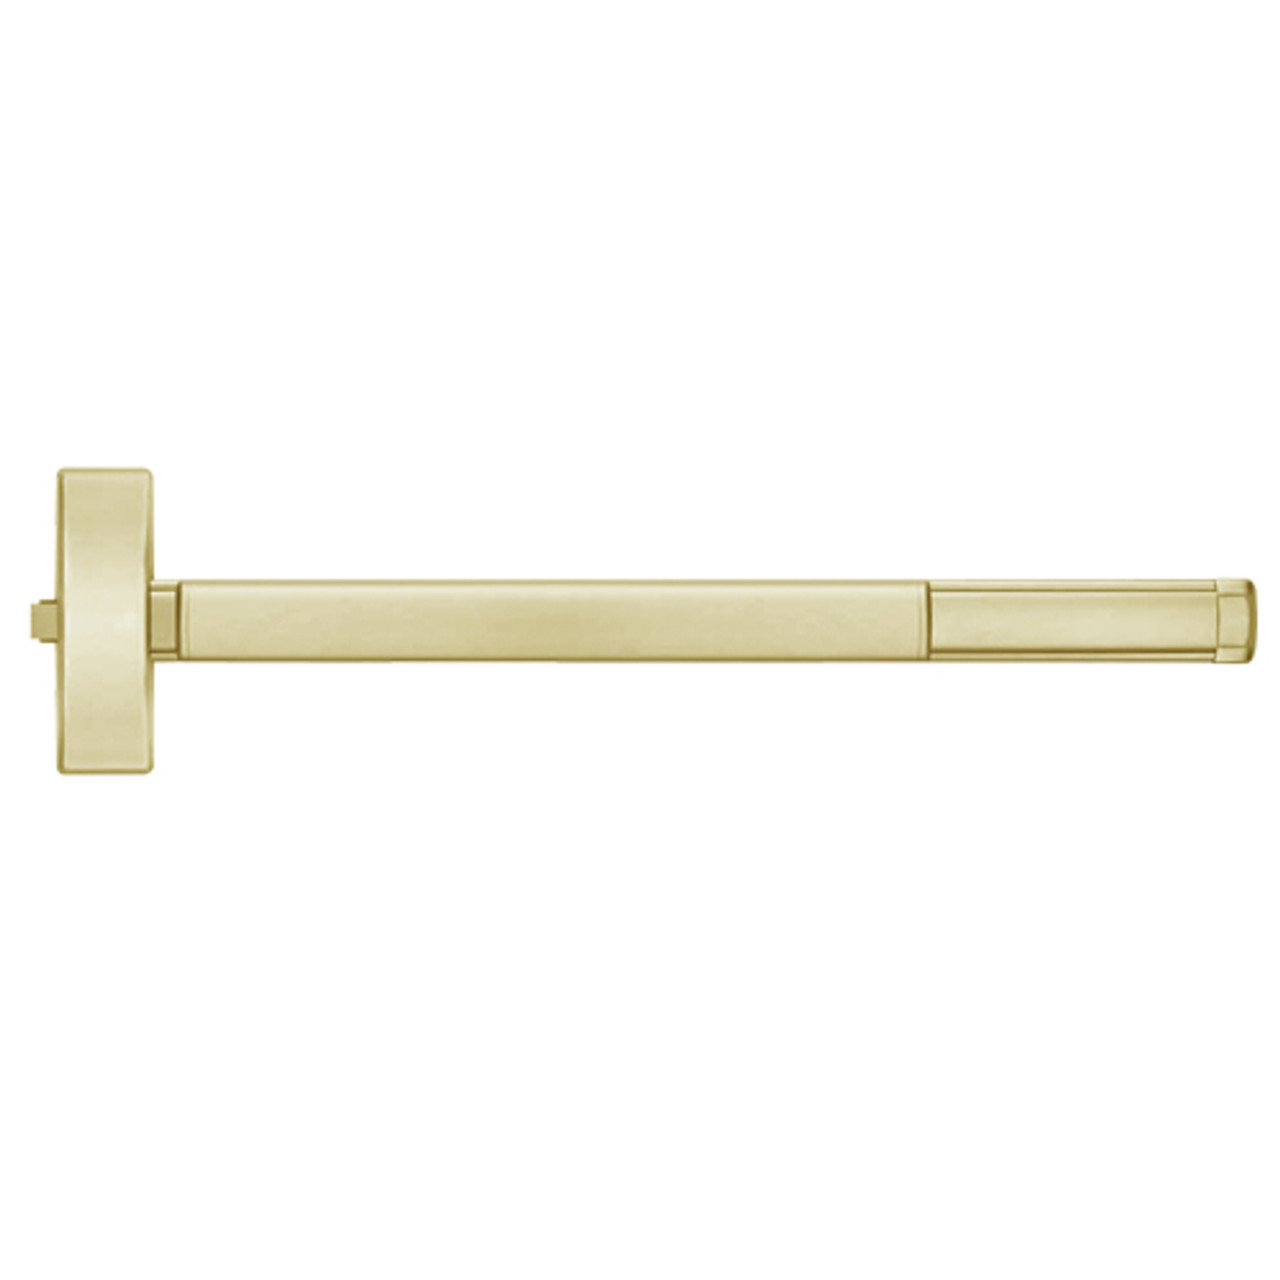 DEFL2101-606-48 PHI 2100 Series Fire Rated Apex Rim Exit Device with Delayed Egress Prepped for Cover Plate in Satin Brass Finish